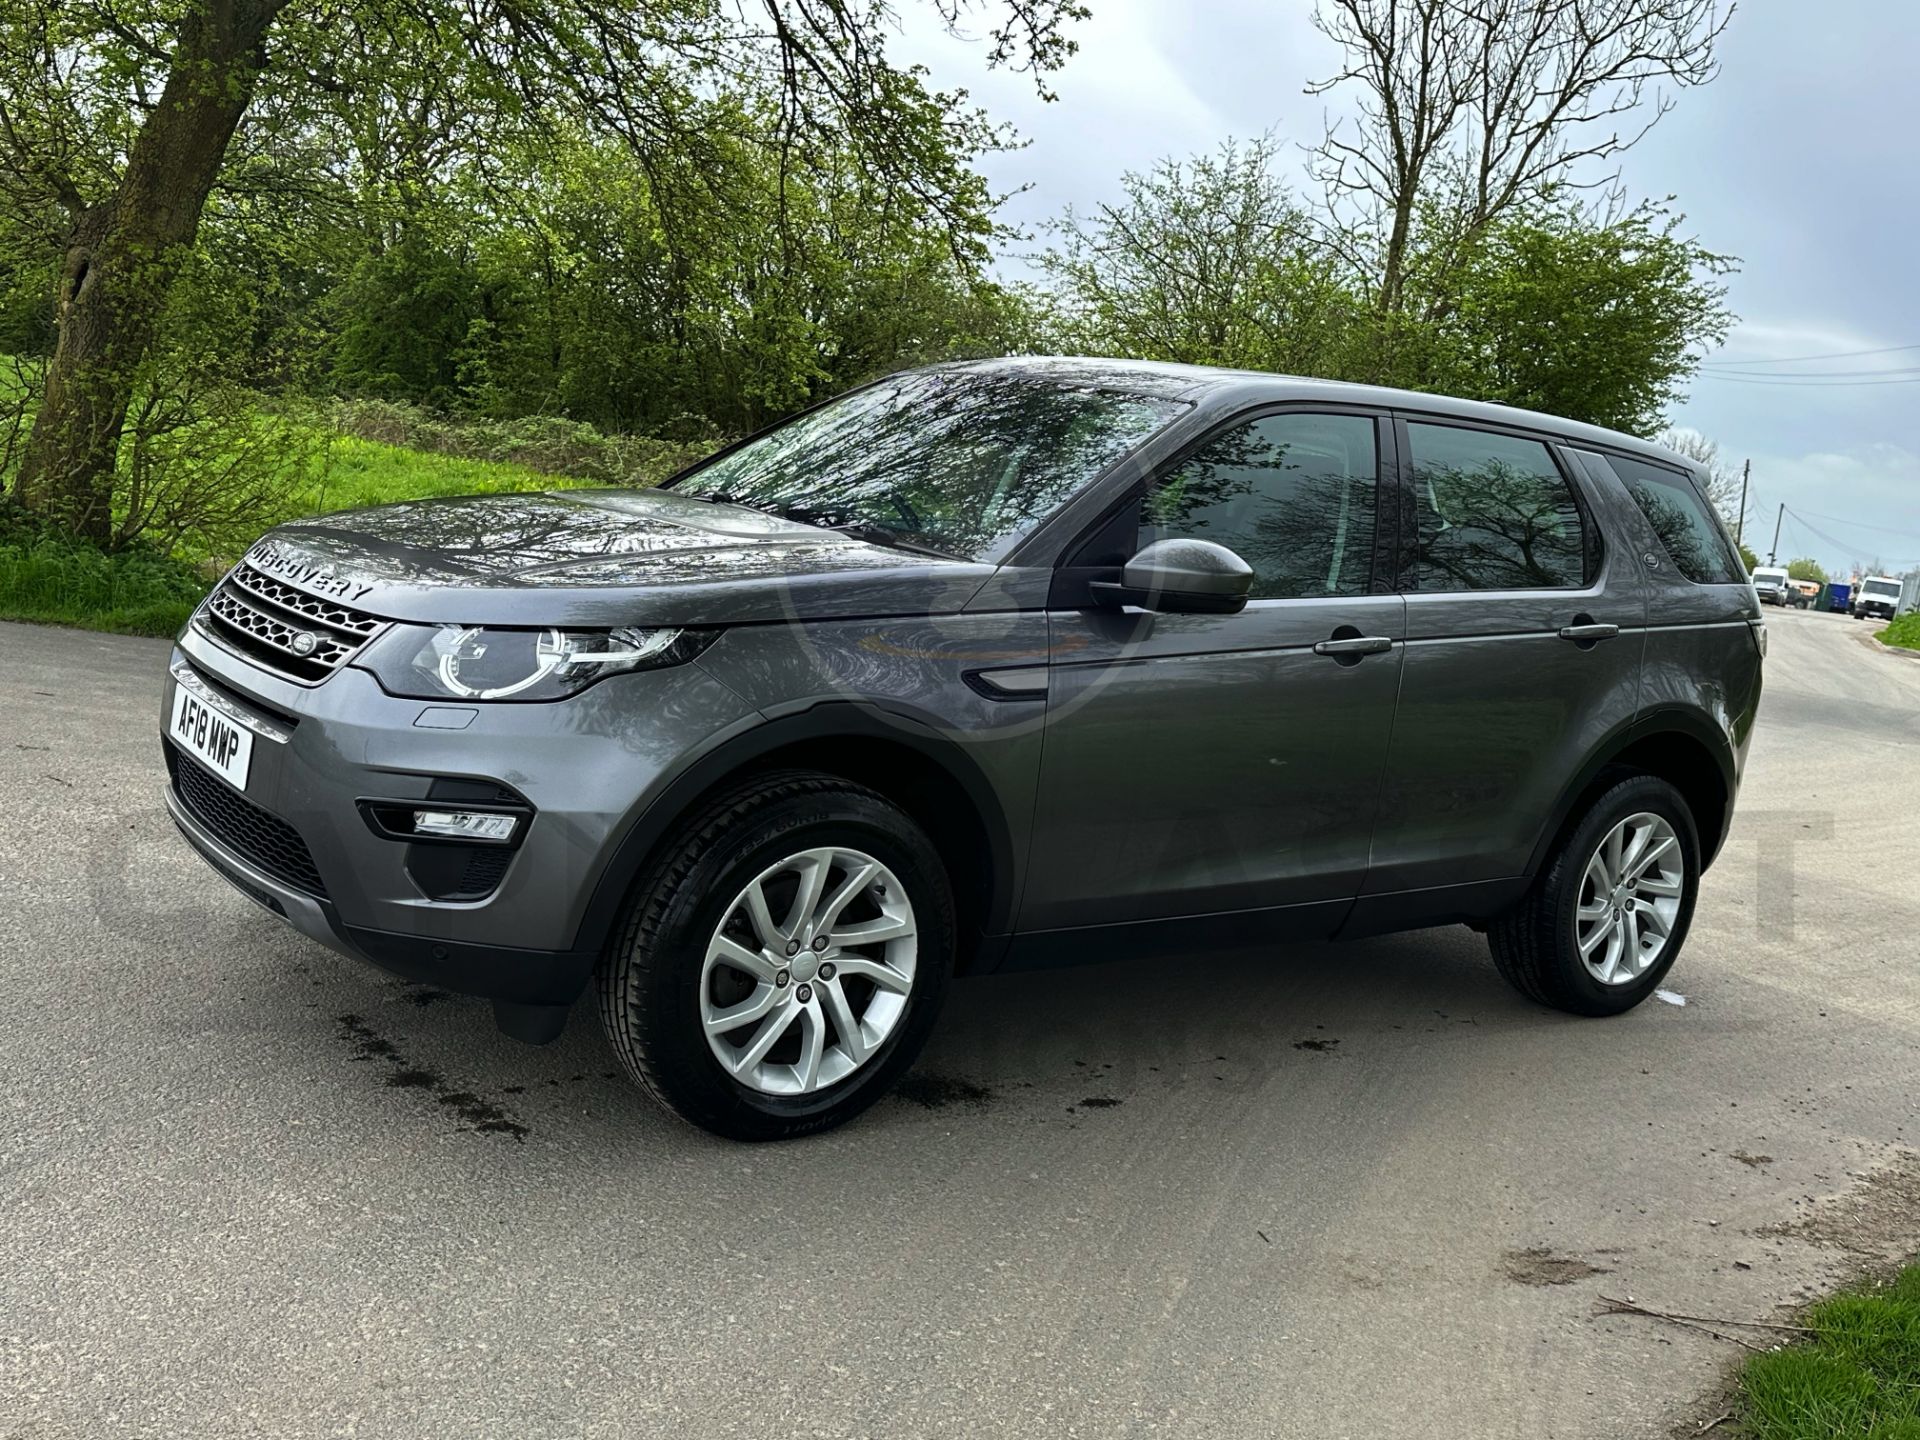 (On Sale) LAND ROVER DISCOVERY SPORT *SE TECH* 5 DOOR SUV (2018 - EURO 6) 2.0 TD4 - AUTO *HUGE SPEC* - Image 7 of 51